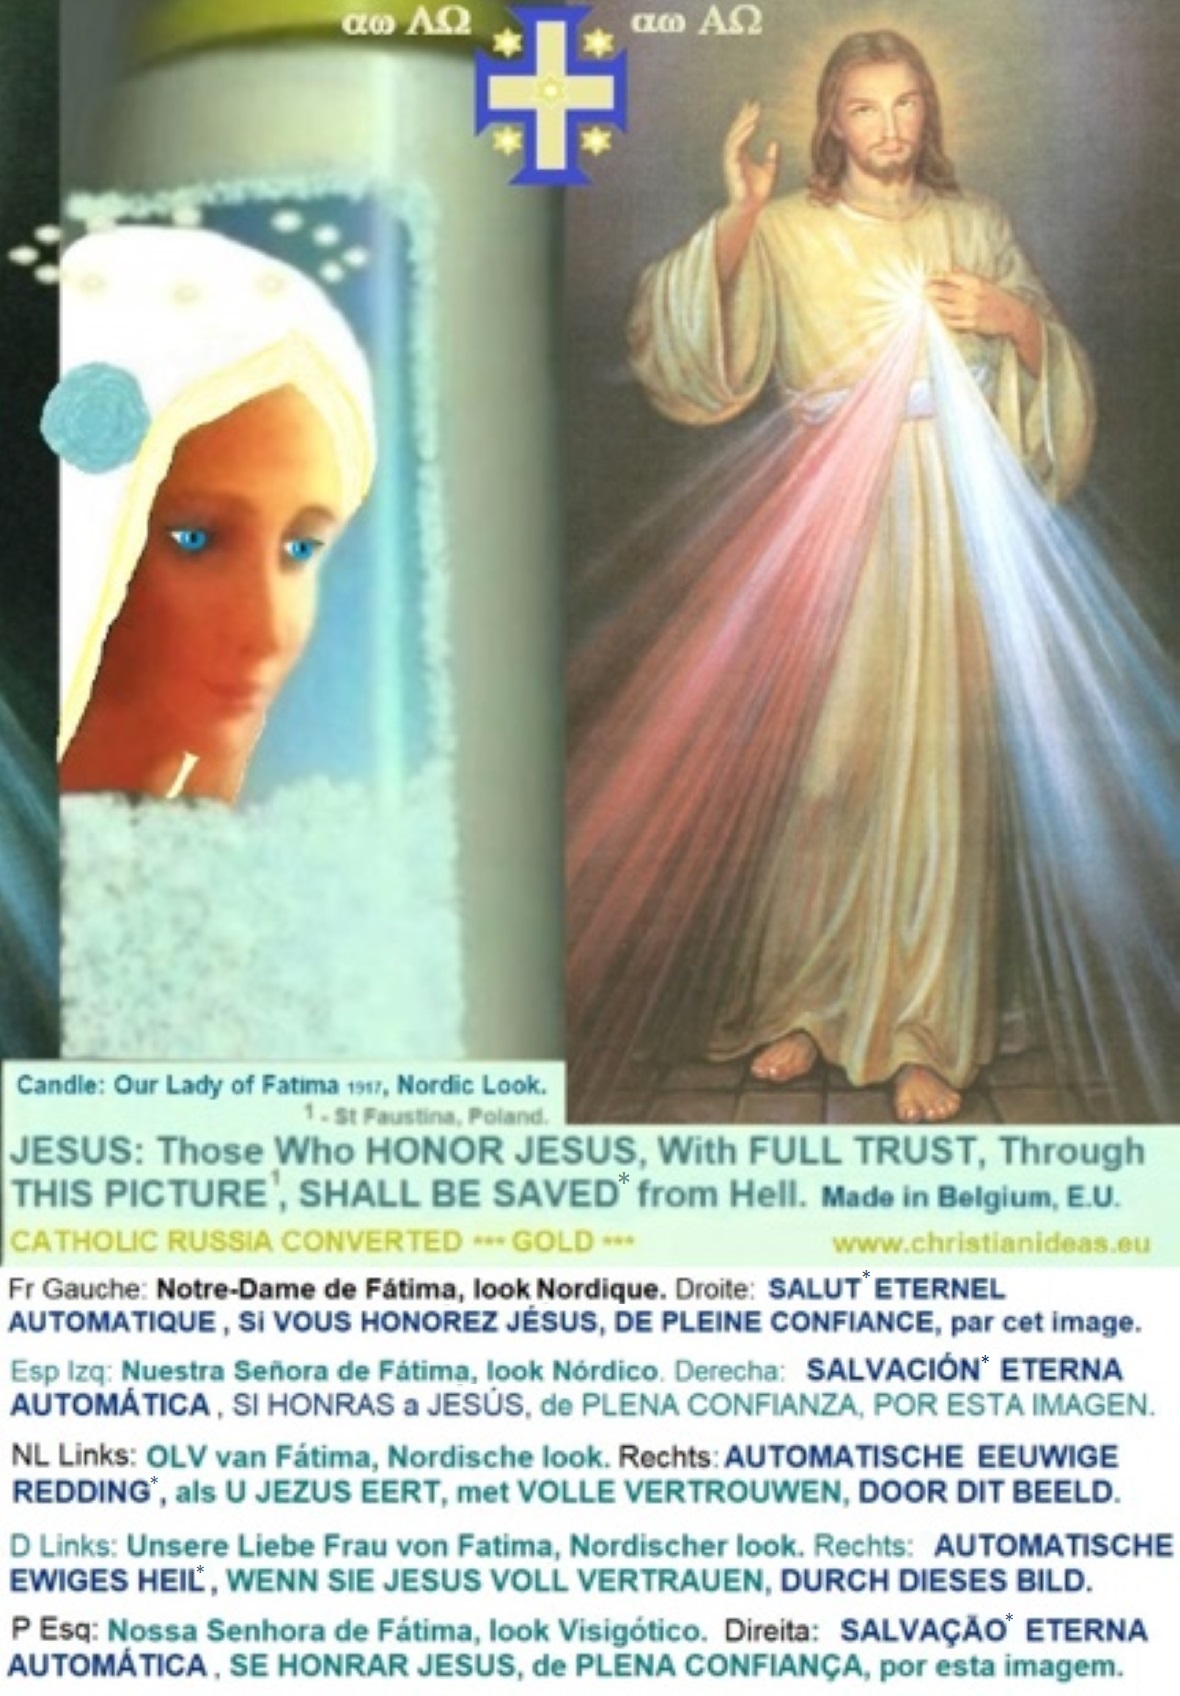 Left: Our Lady, Nordic Look. Right: Those who honor Jesus, with full trust, through this picture , shall be saved